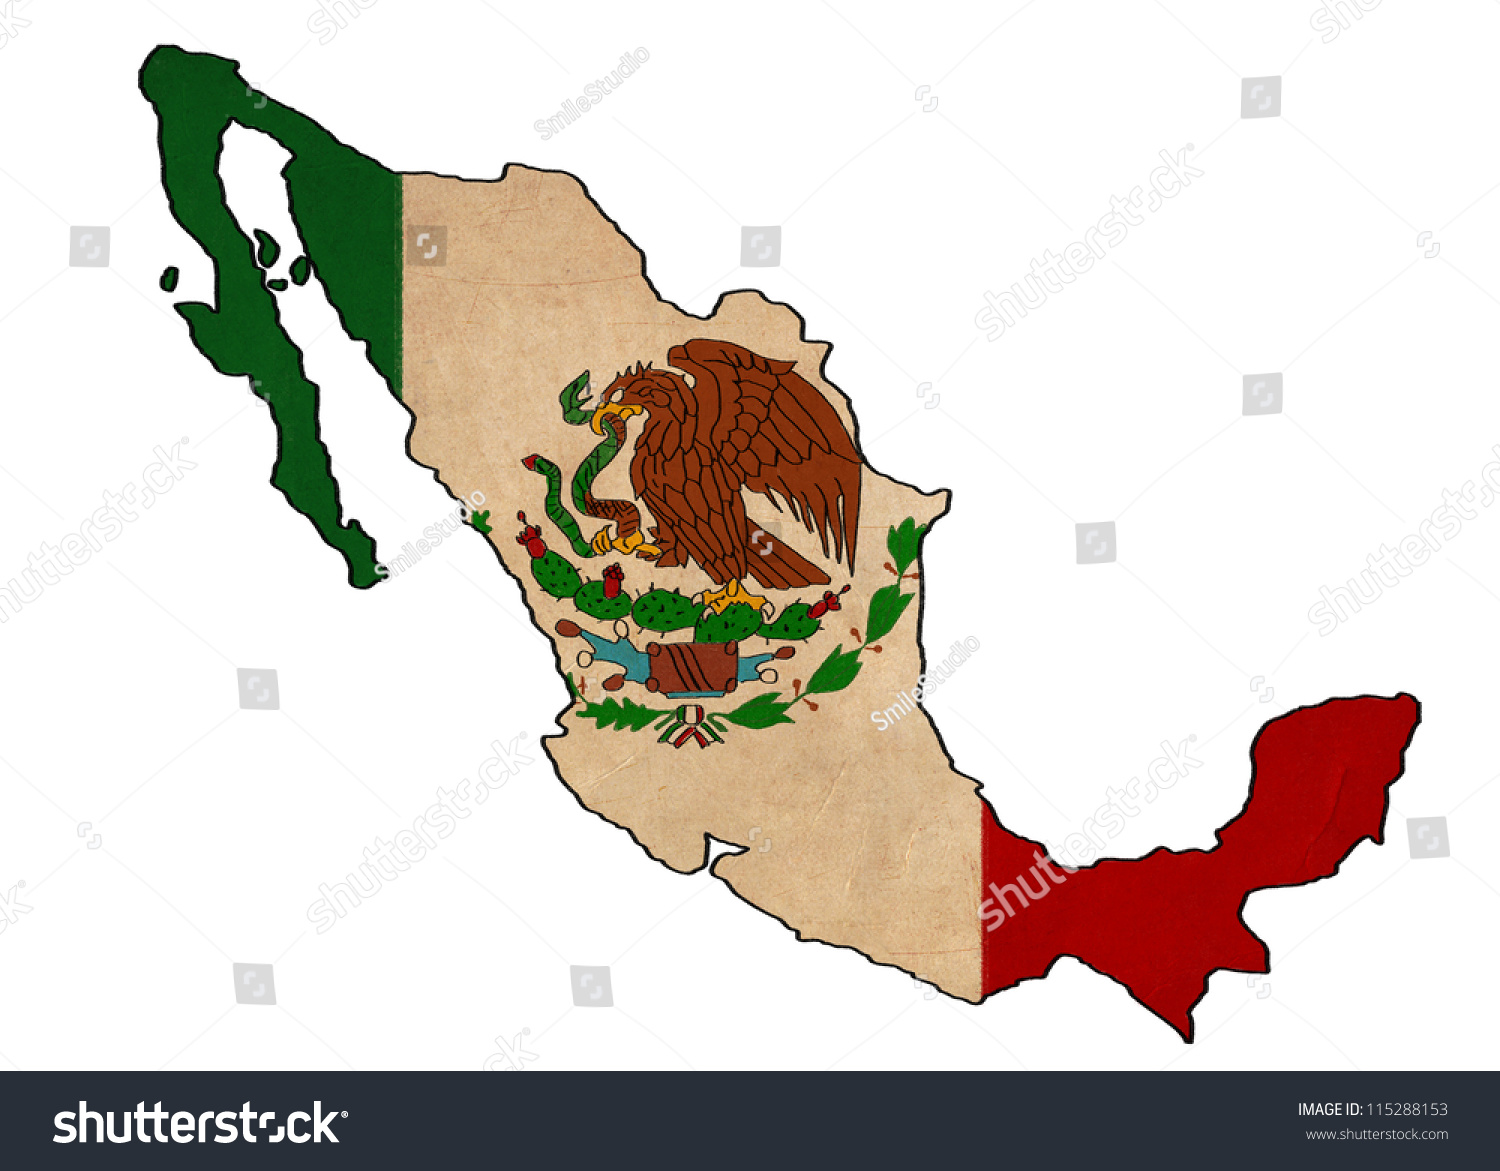 clipart map of mexico - photo #28